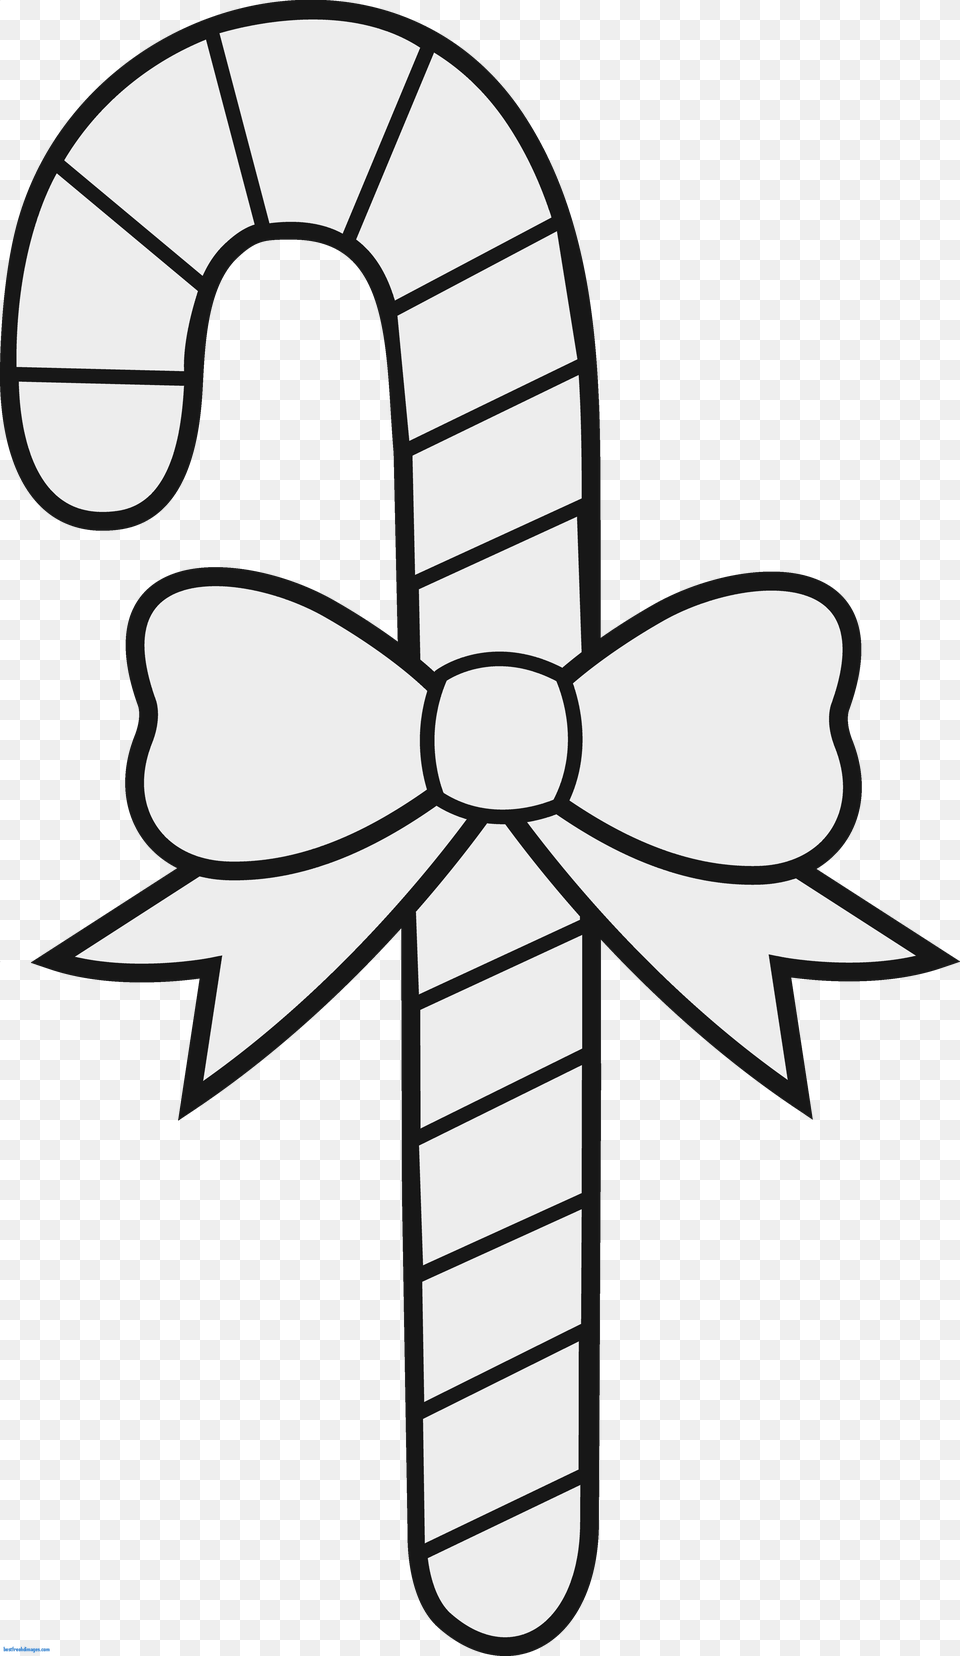 Pinwheel Drawing Black And White Clipart Christmas Drawings Candy Cane, Accessories, Formal Wear, Tie, Art Free Png Download